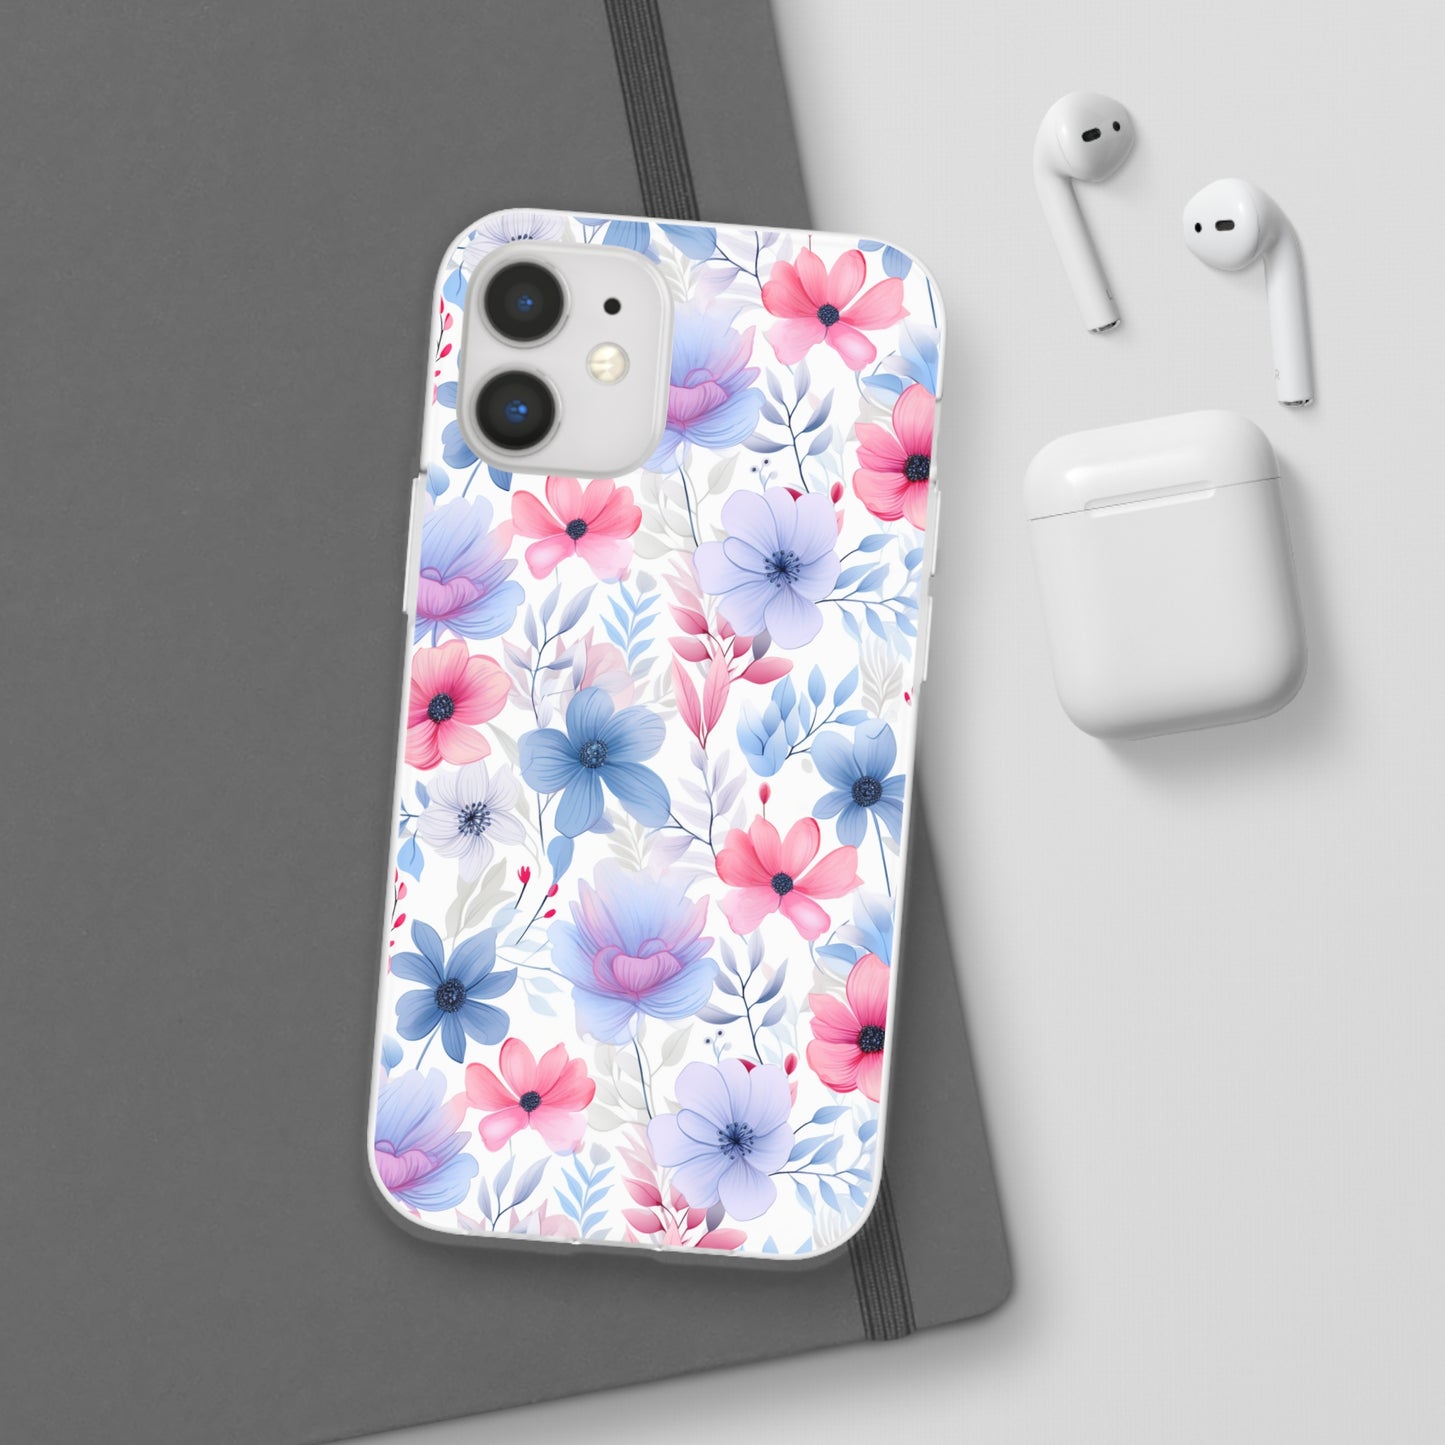 Floral Whispers - Soft Hues of Violets, Pinks, and Blues - Flexi Phone Case Phone Case Pattern Symphony iPhone 12 Mini  